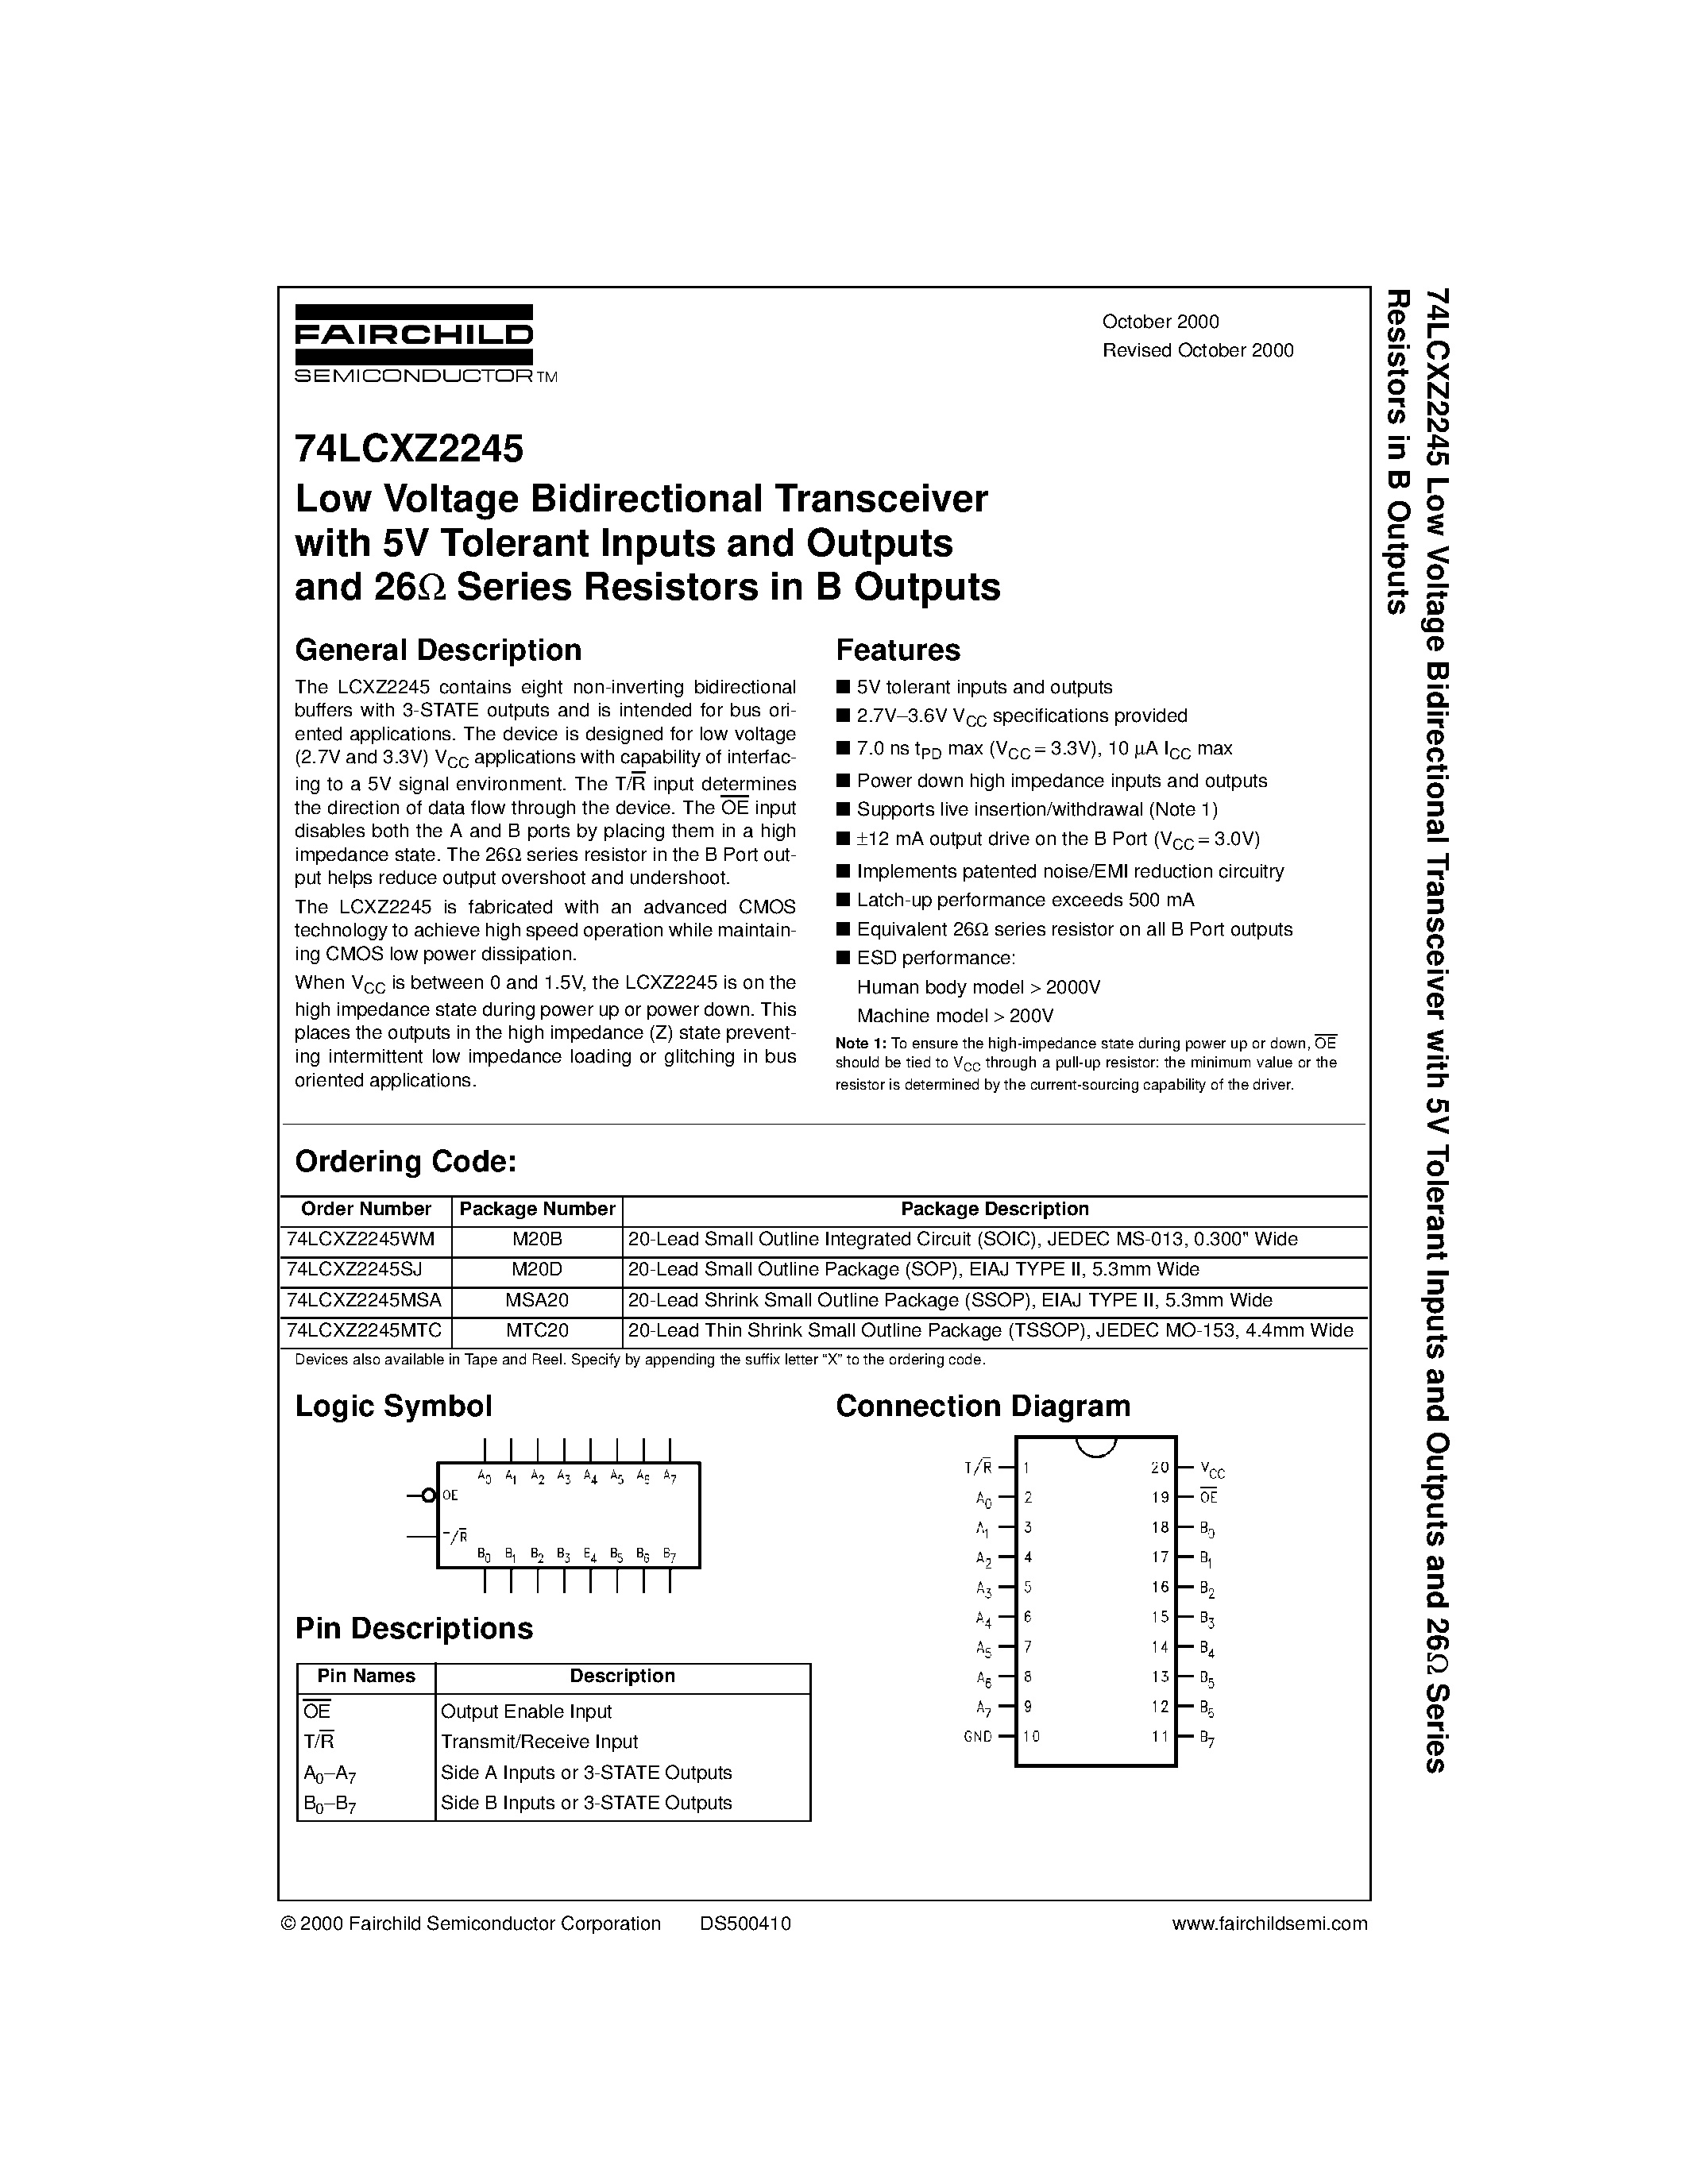 Datasheet 74LCXZ2245MSA - Low Voltage Bidirectional Transceiver with 5V Tolerant Inputs and Outputs and 26 Series Resistors in B Outputs page 1